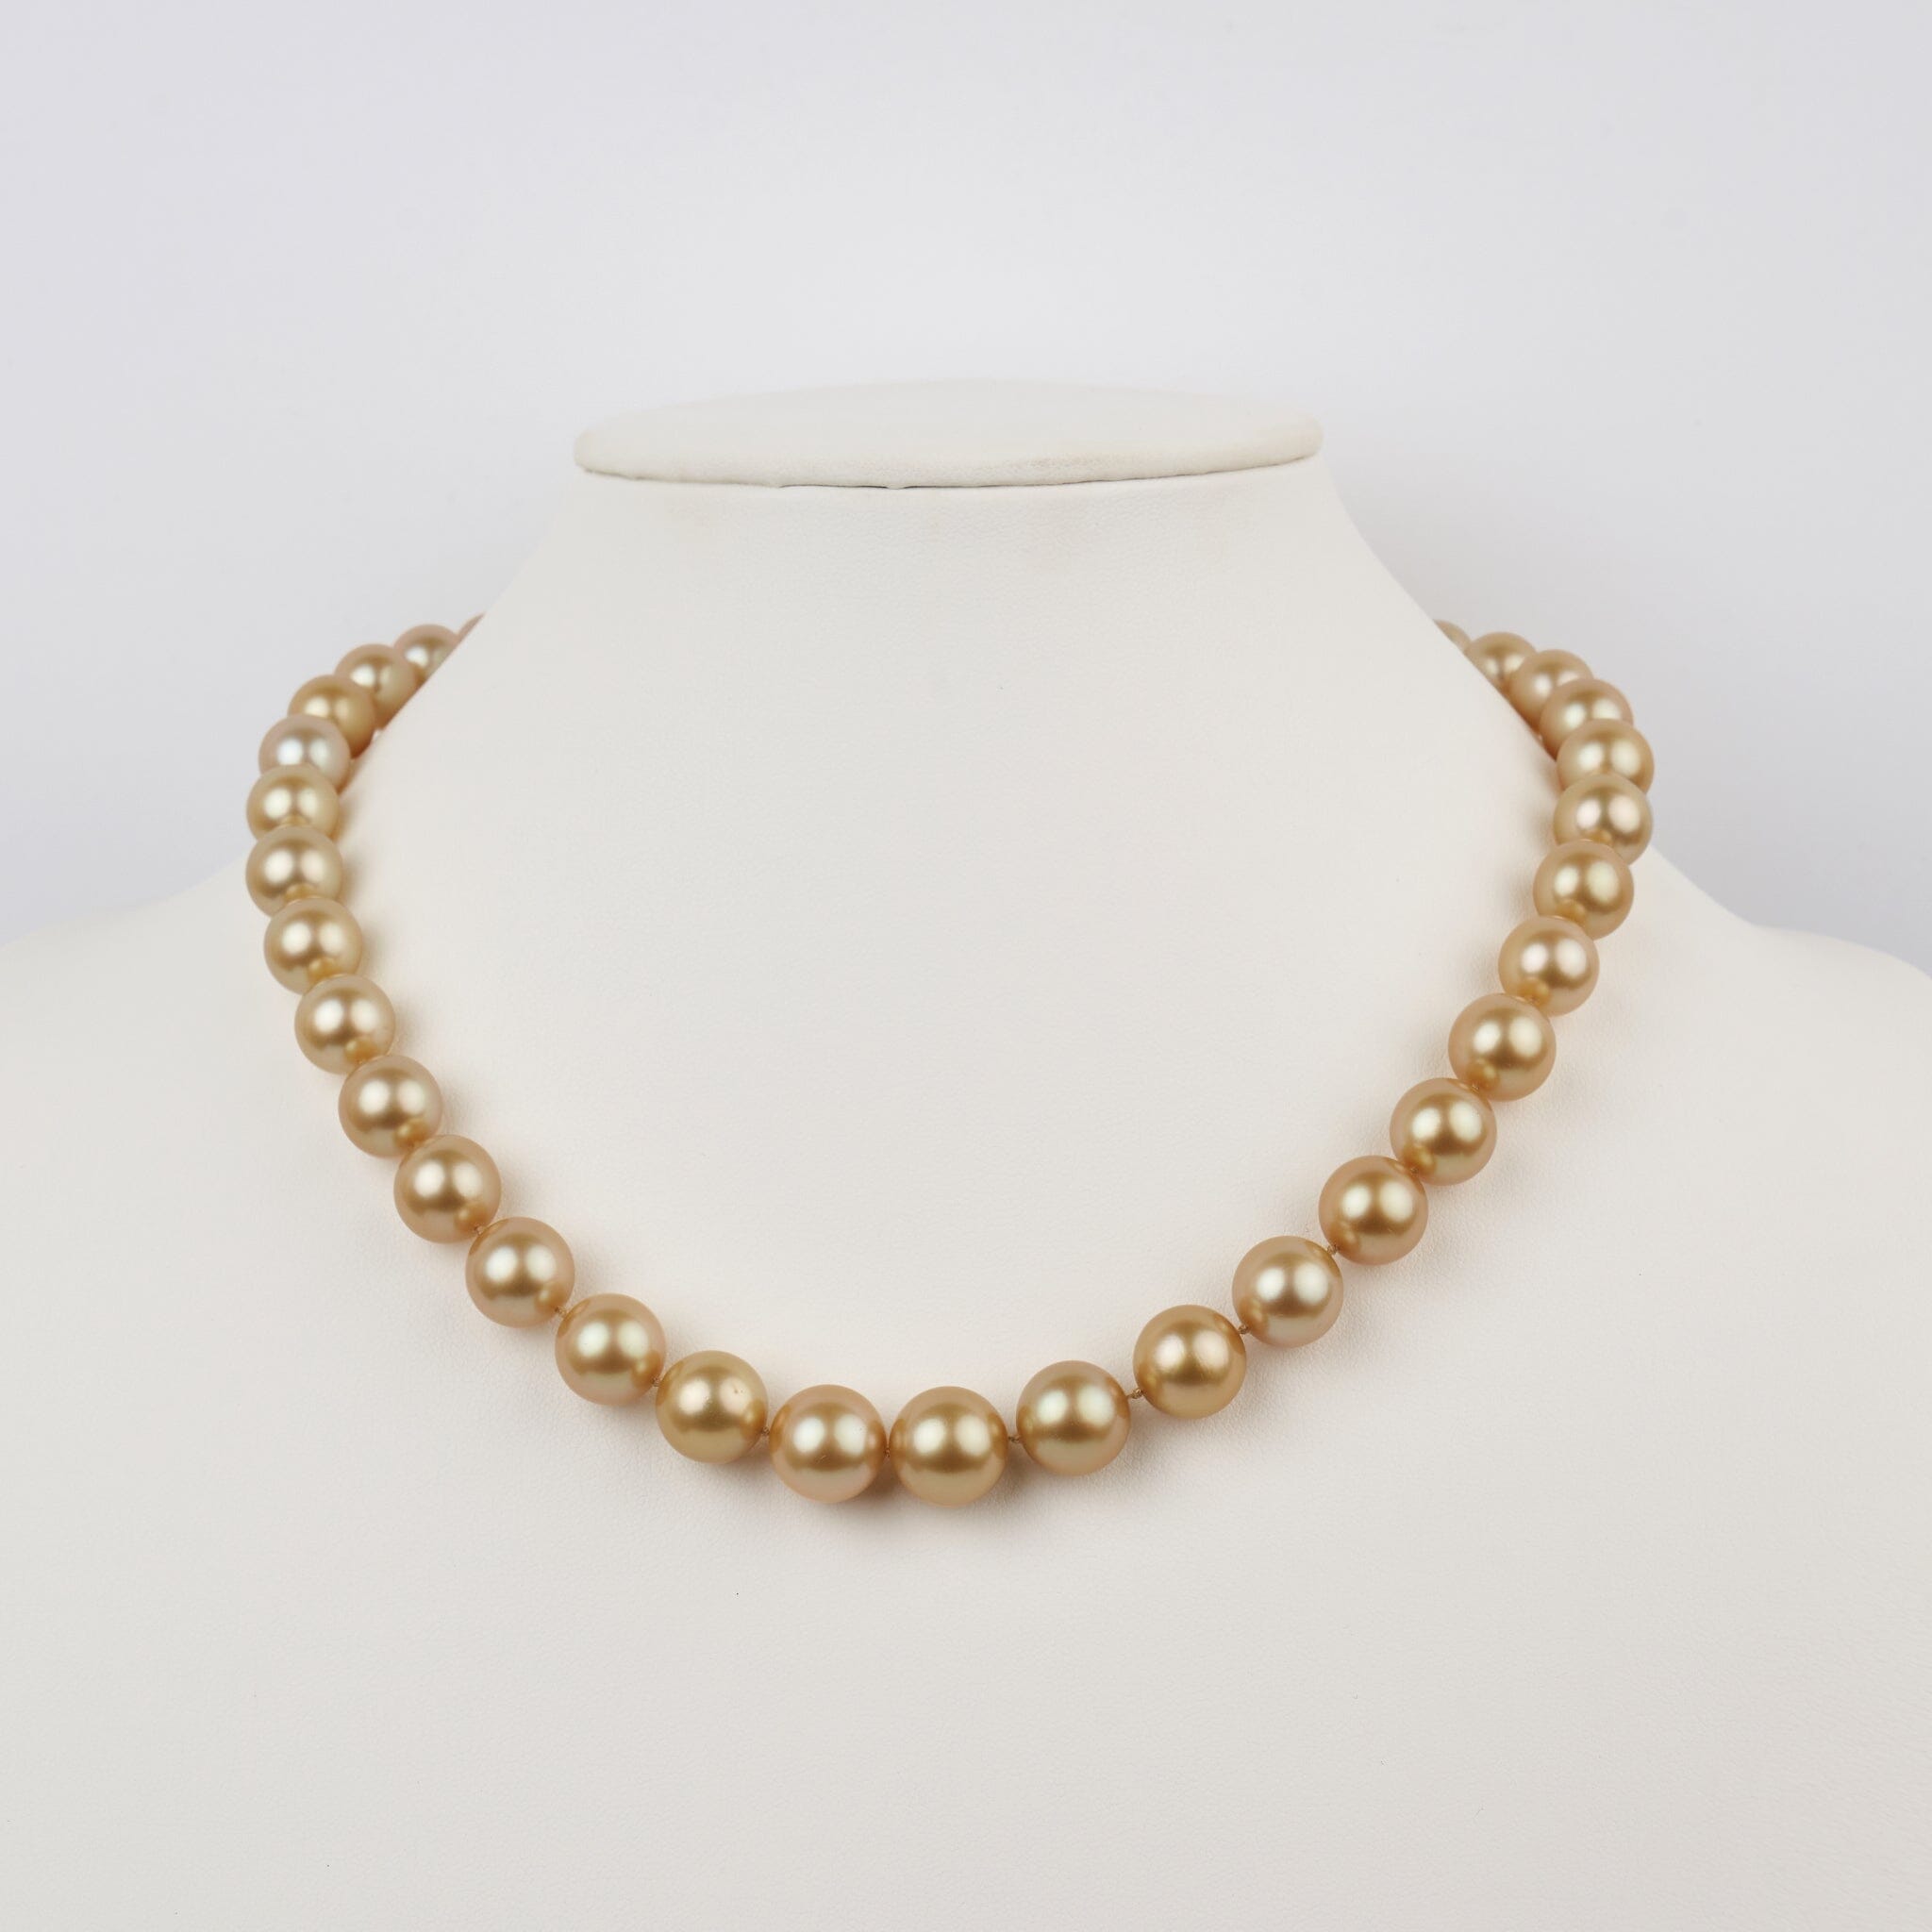 10.1-13.1 mm AAA Golden South Sea Round Pearl Necklace bust view